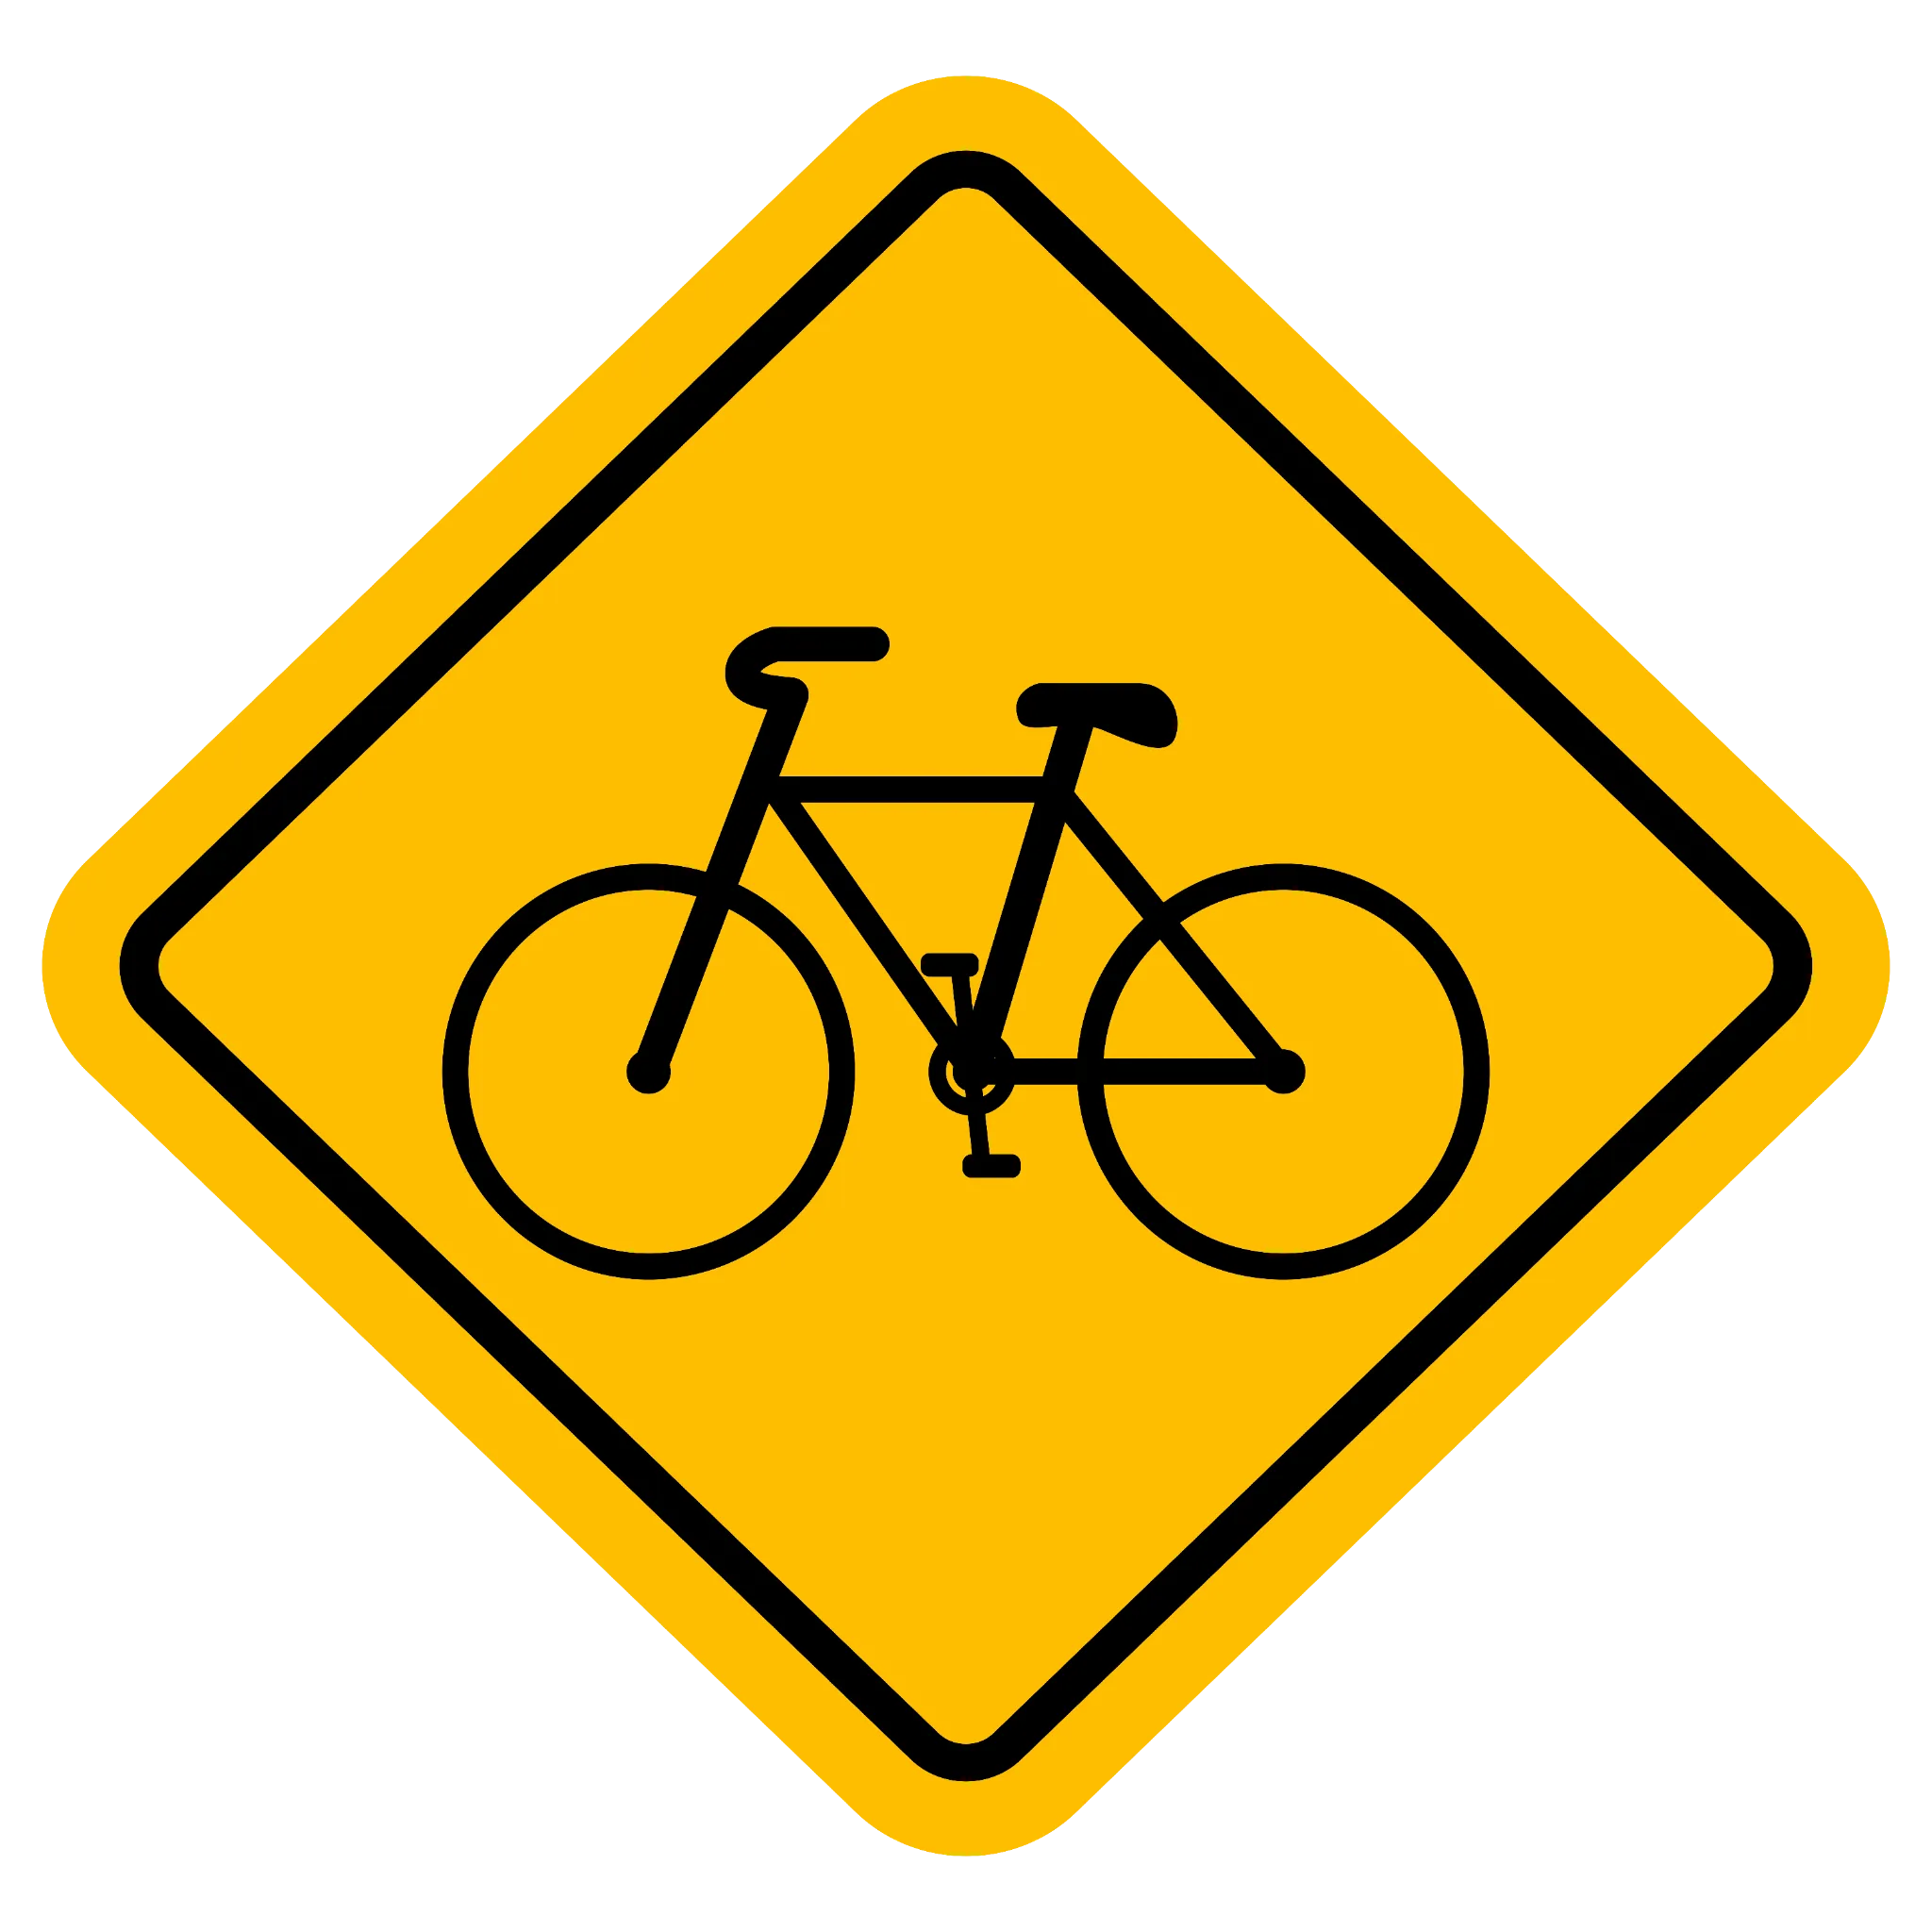 Traffic sign for bicycle road safety